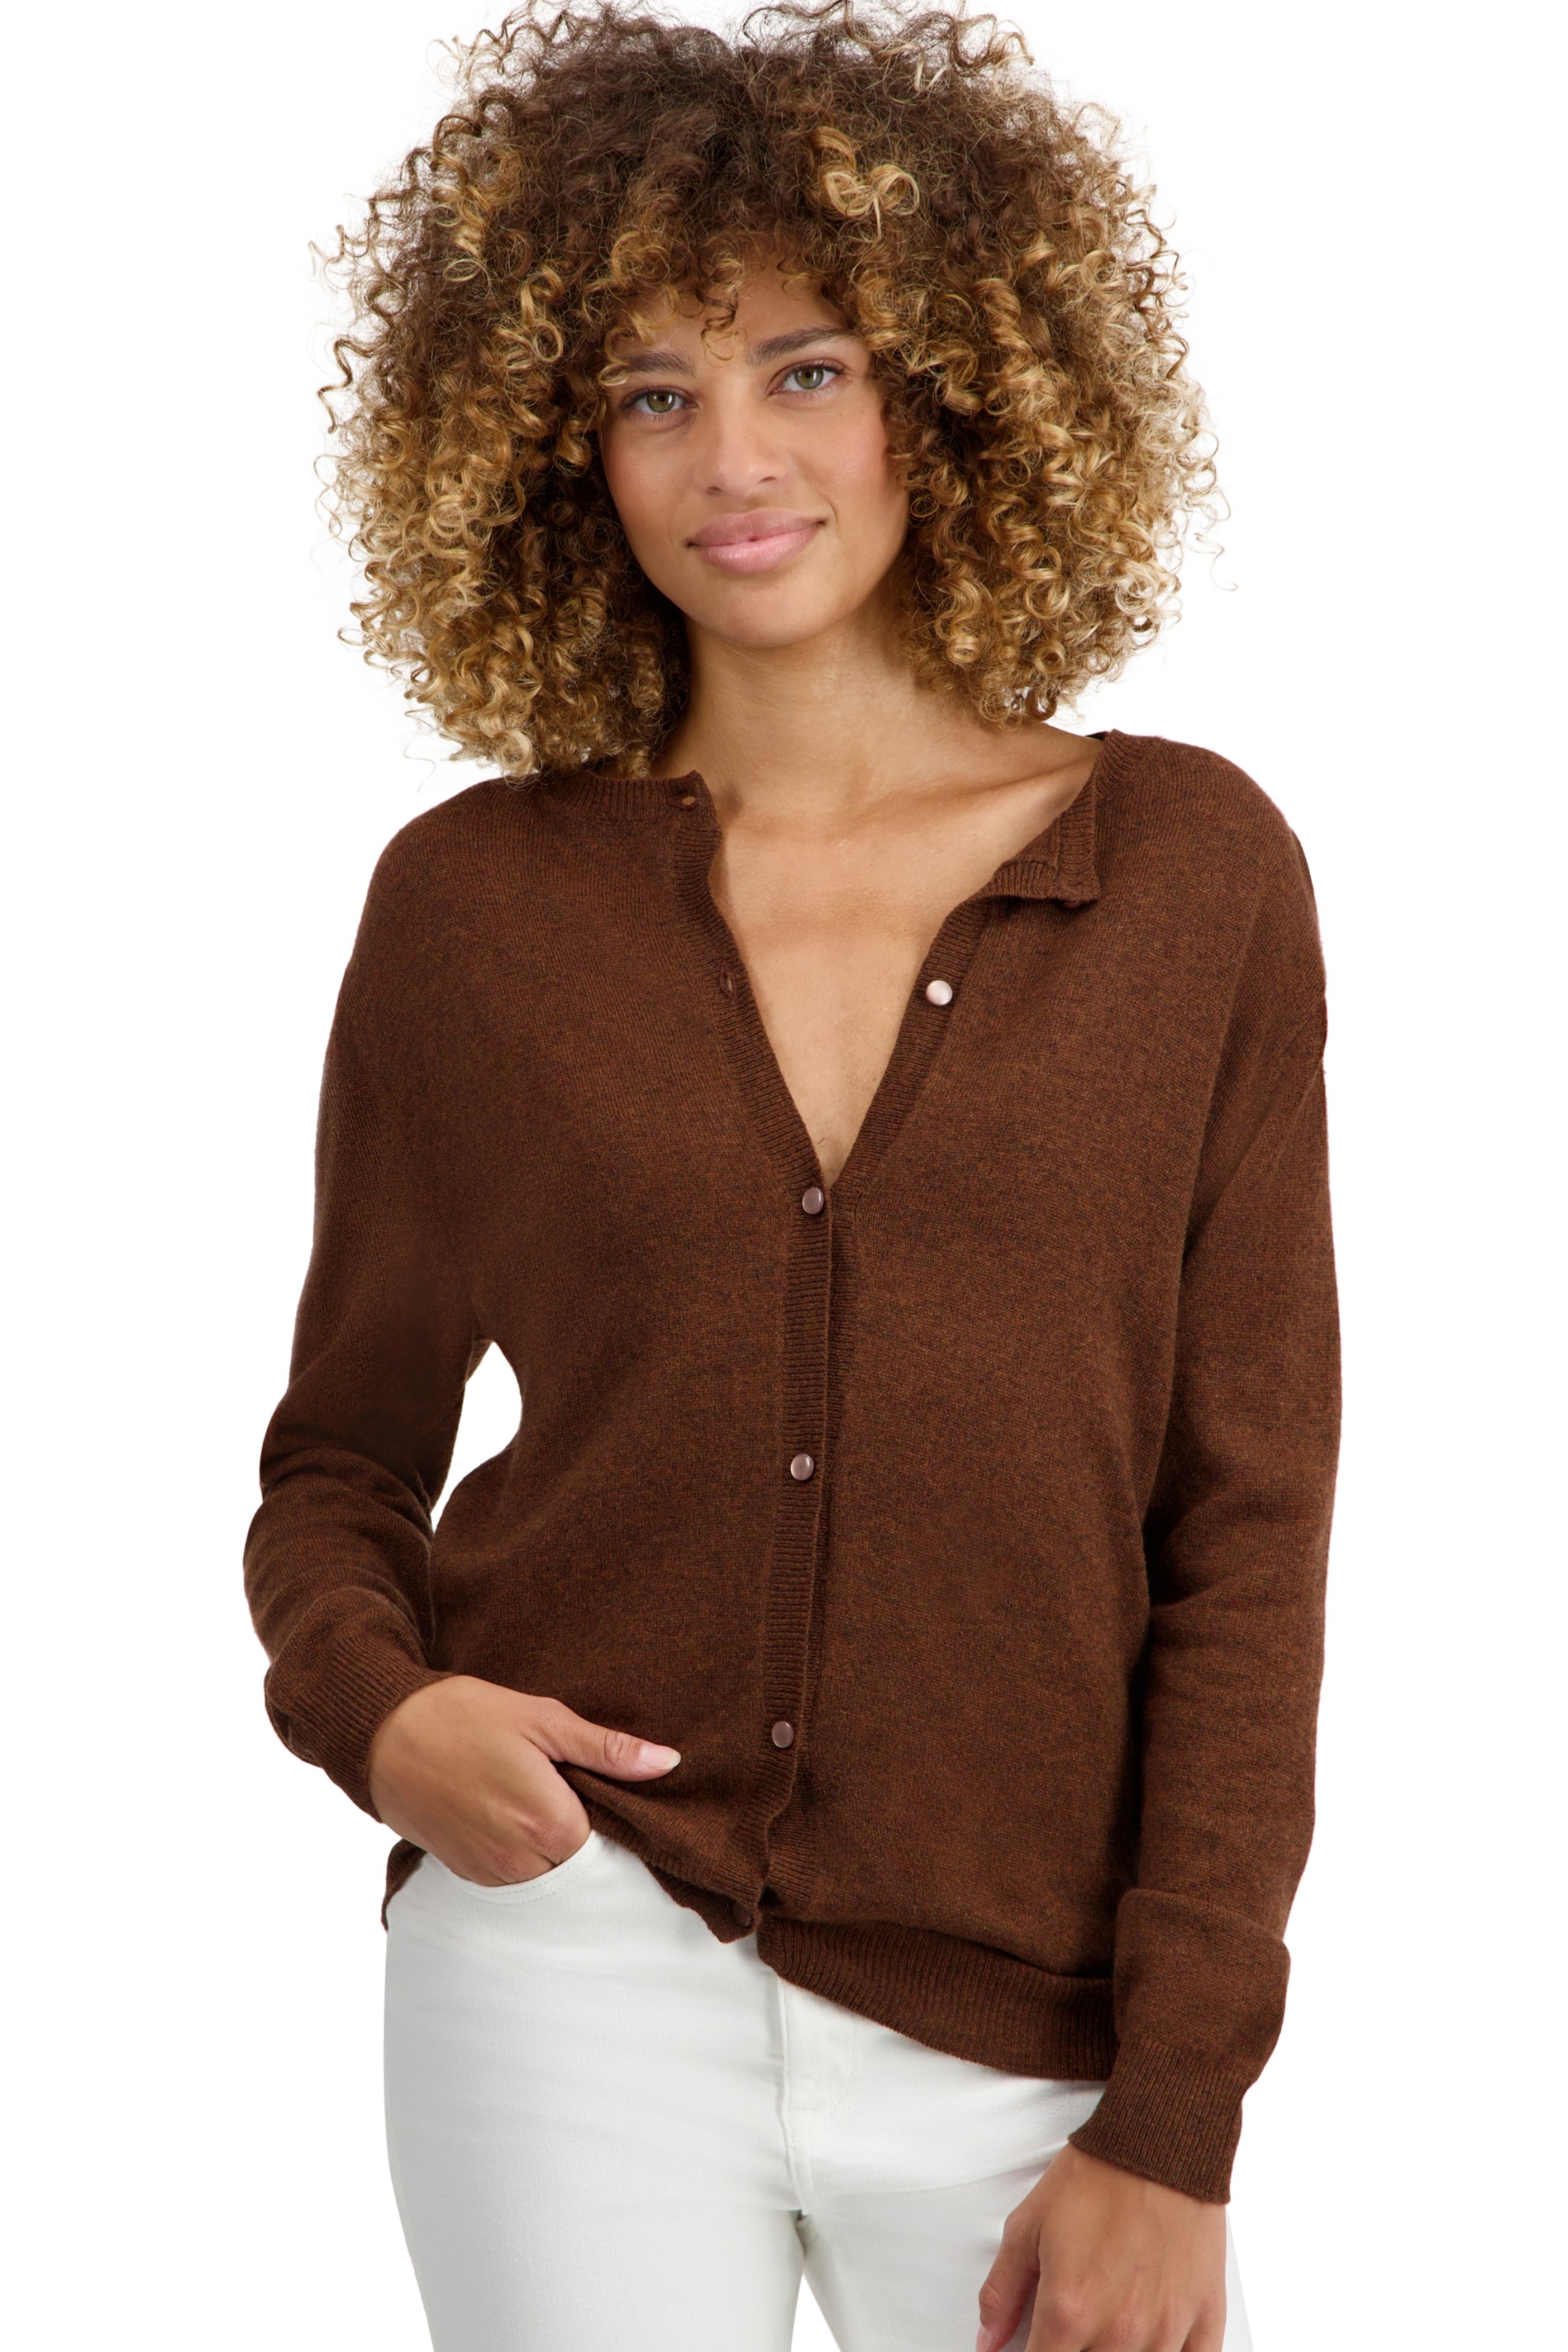 Cashmere ladies basic sweaters at low prices tyra first mace s